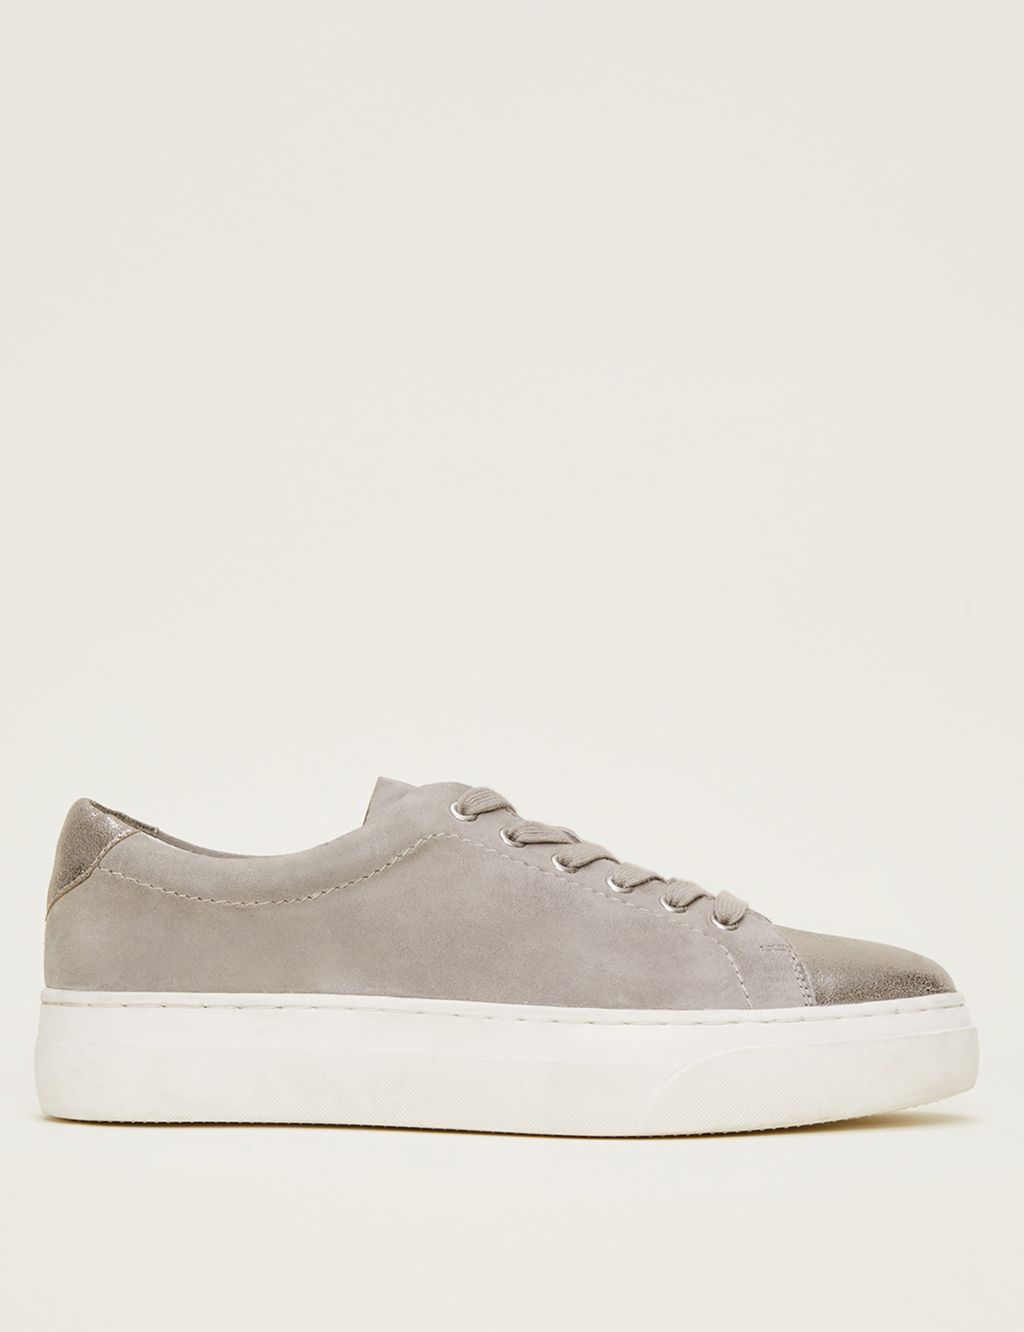 Leather Suede Lace Up Metallic Trainers image 1